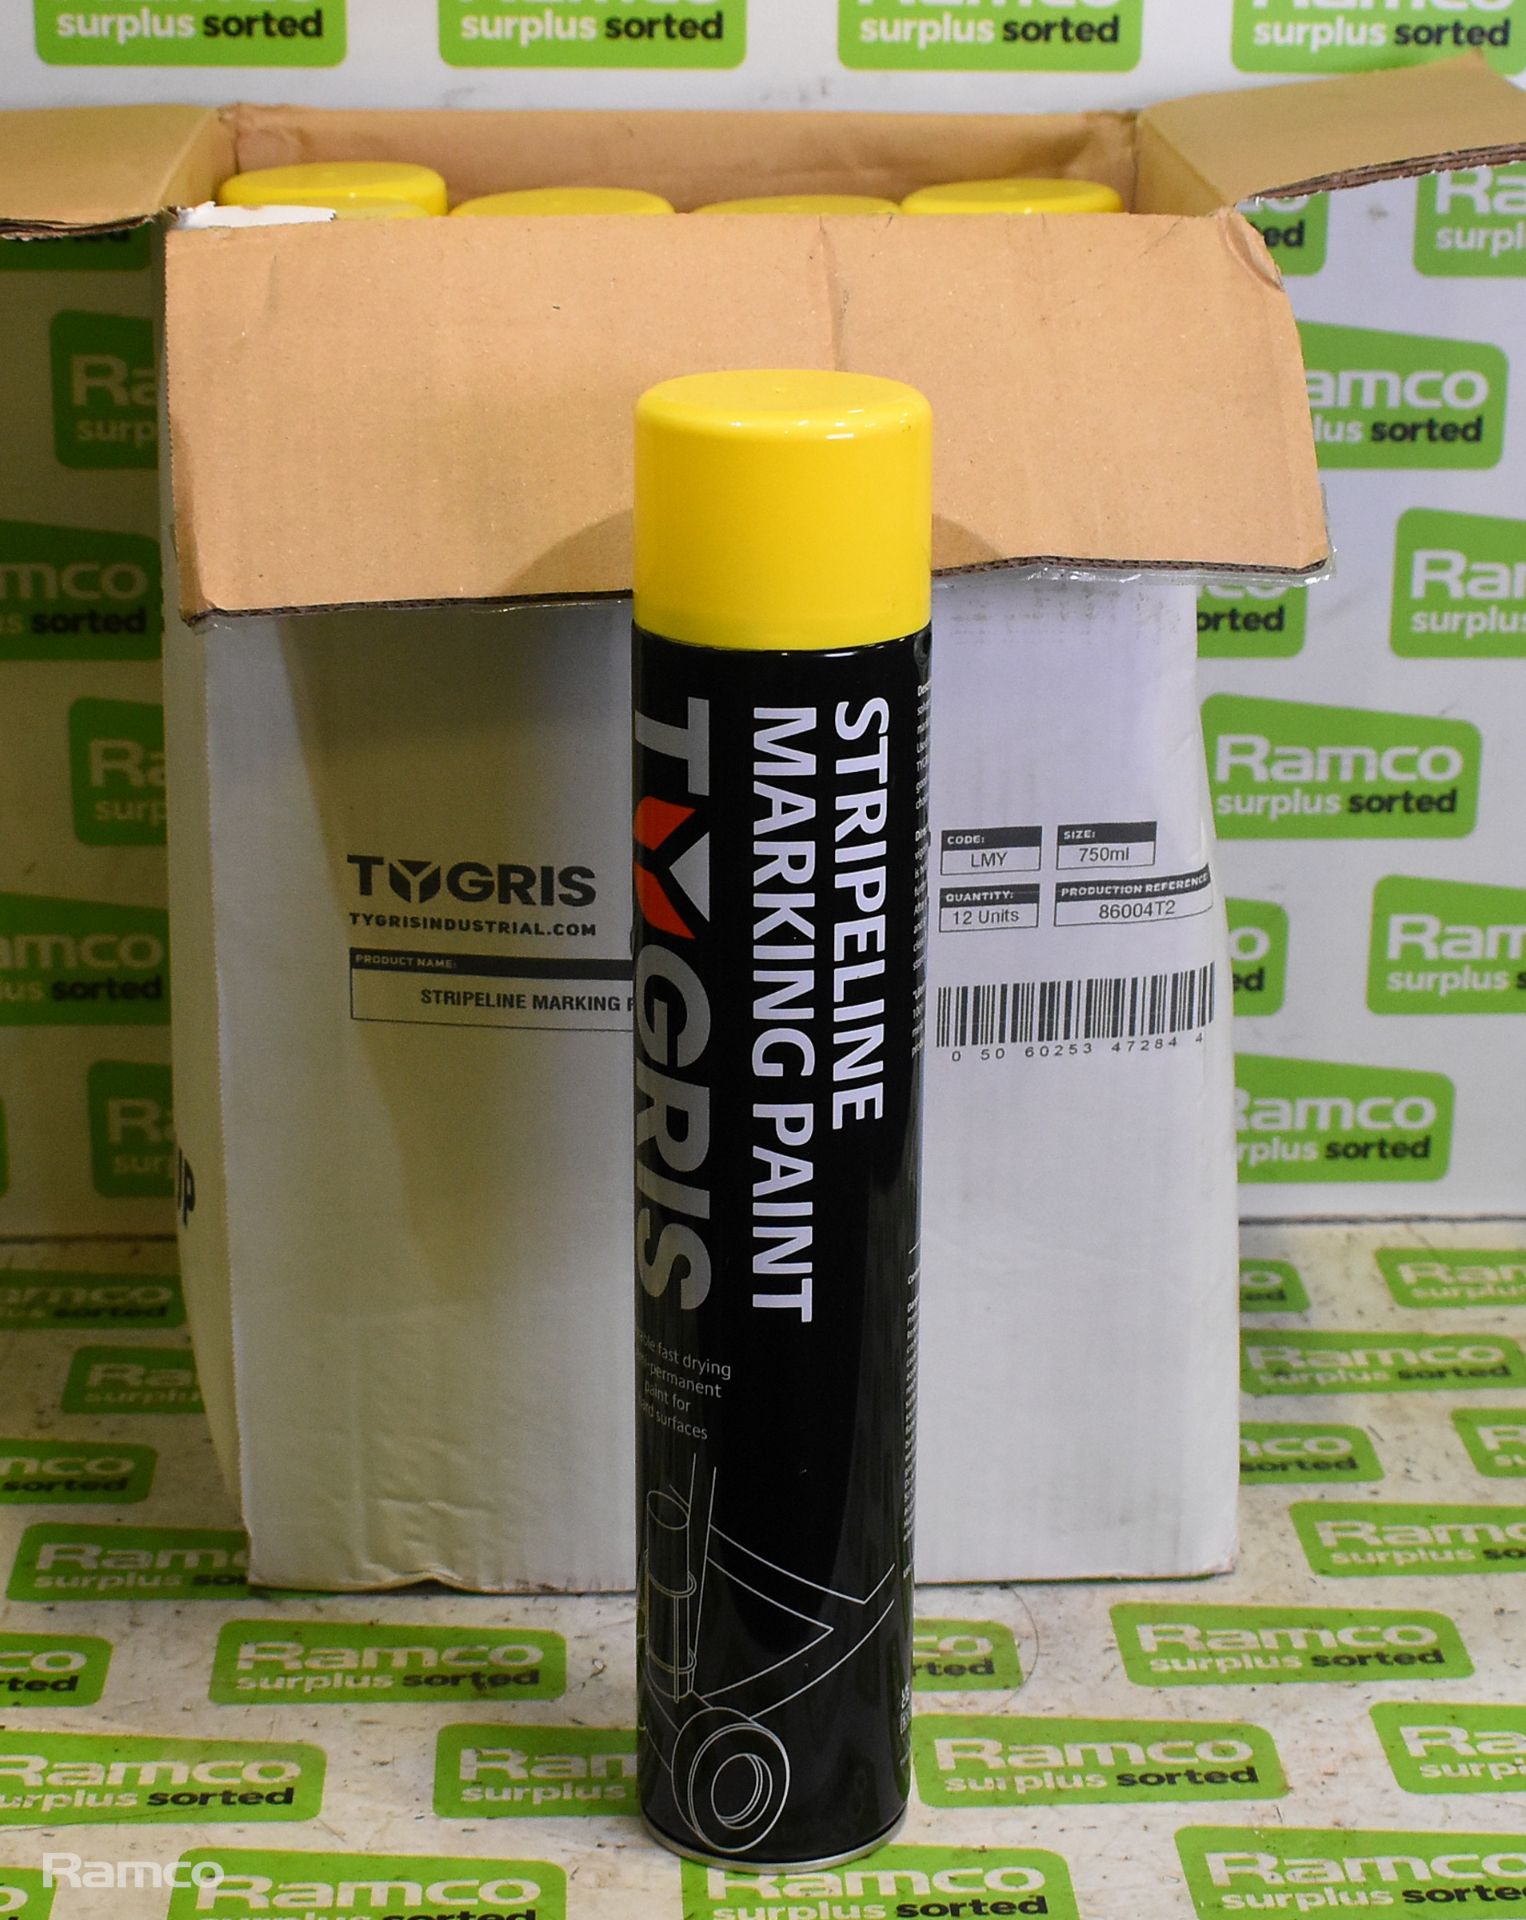 12x cans of Tygris stripe line marking paint - yellow 750ml